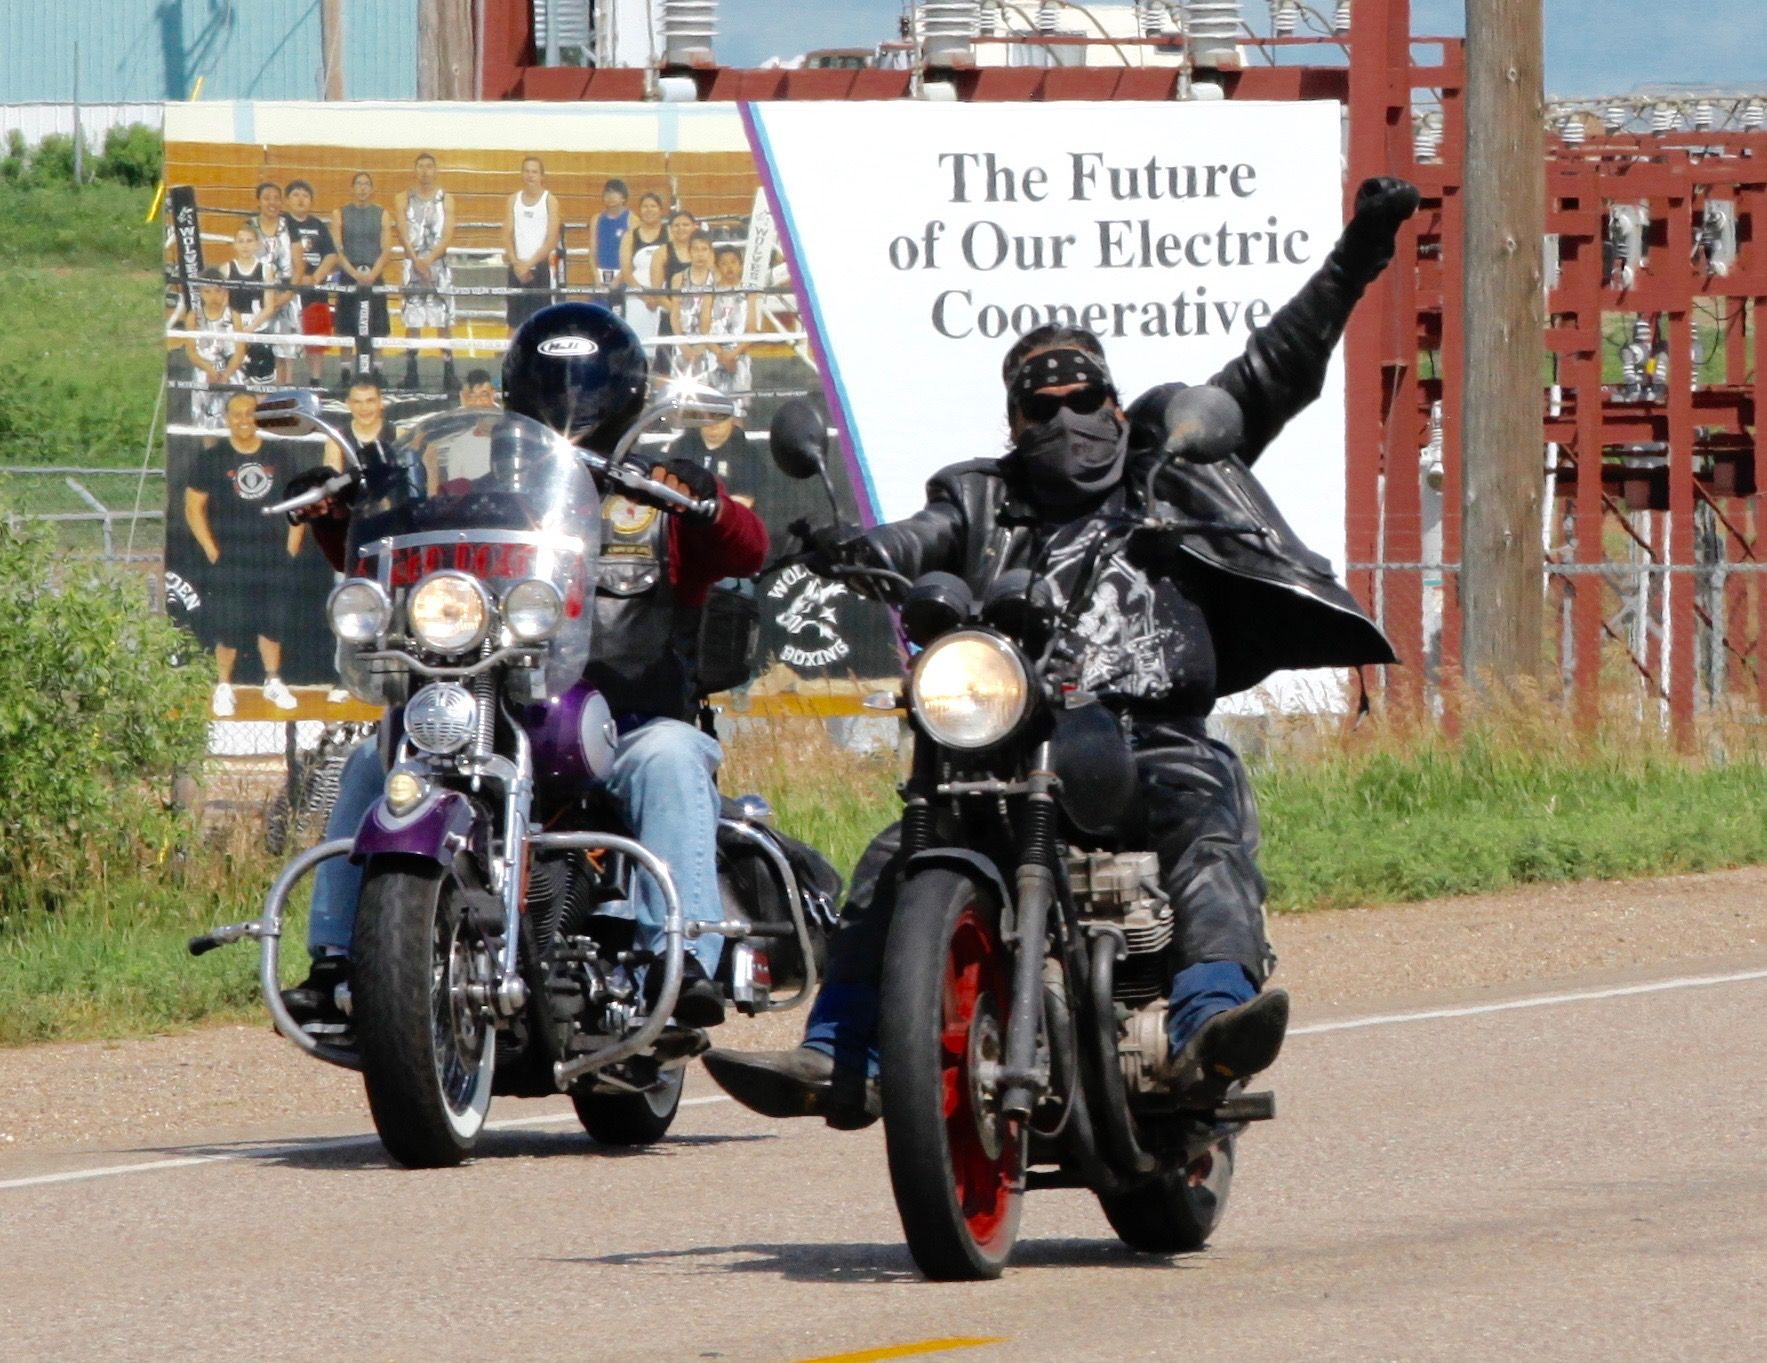 Sturgis bike rally cause for concern. West River Eagle